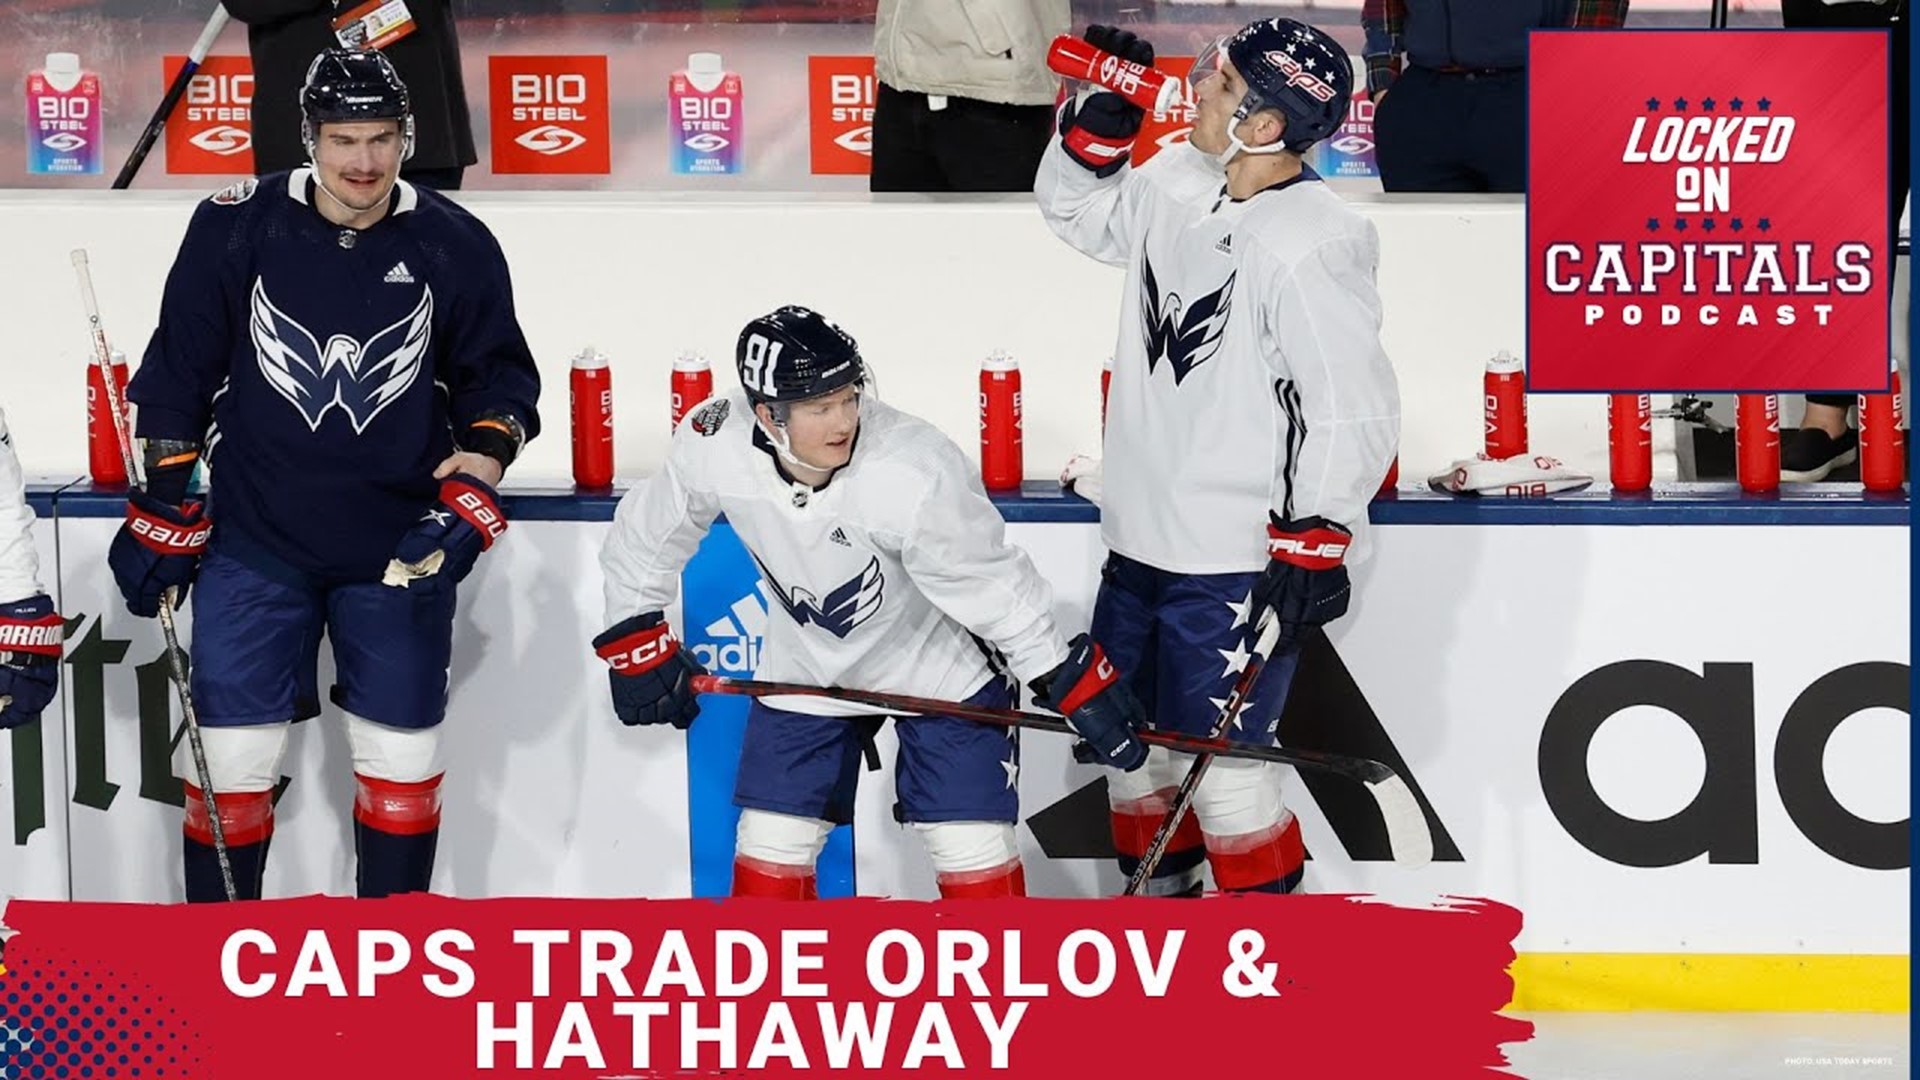 In this edition of Locked on Capitals Dan talks about the trade that sent Dimitry Orlov and Garnet Hathaway to the Bruins.